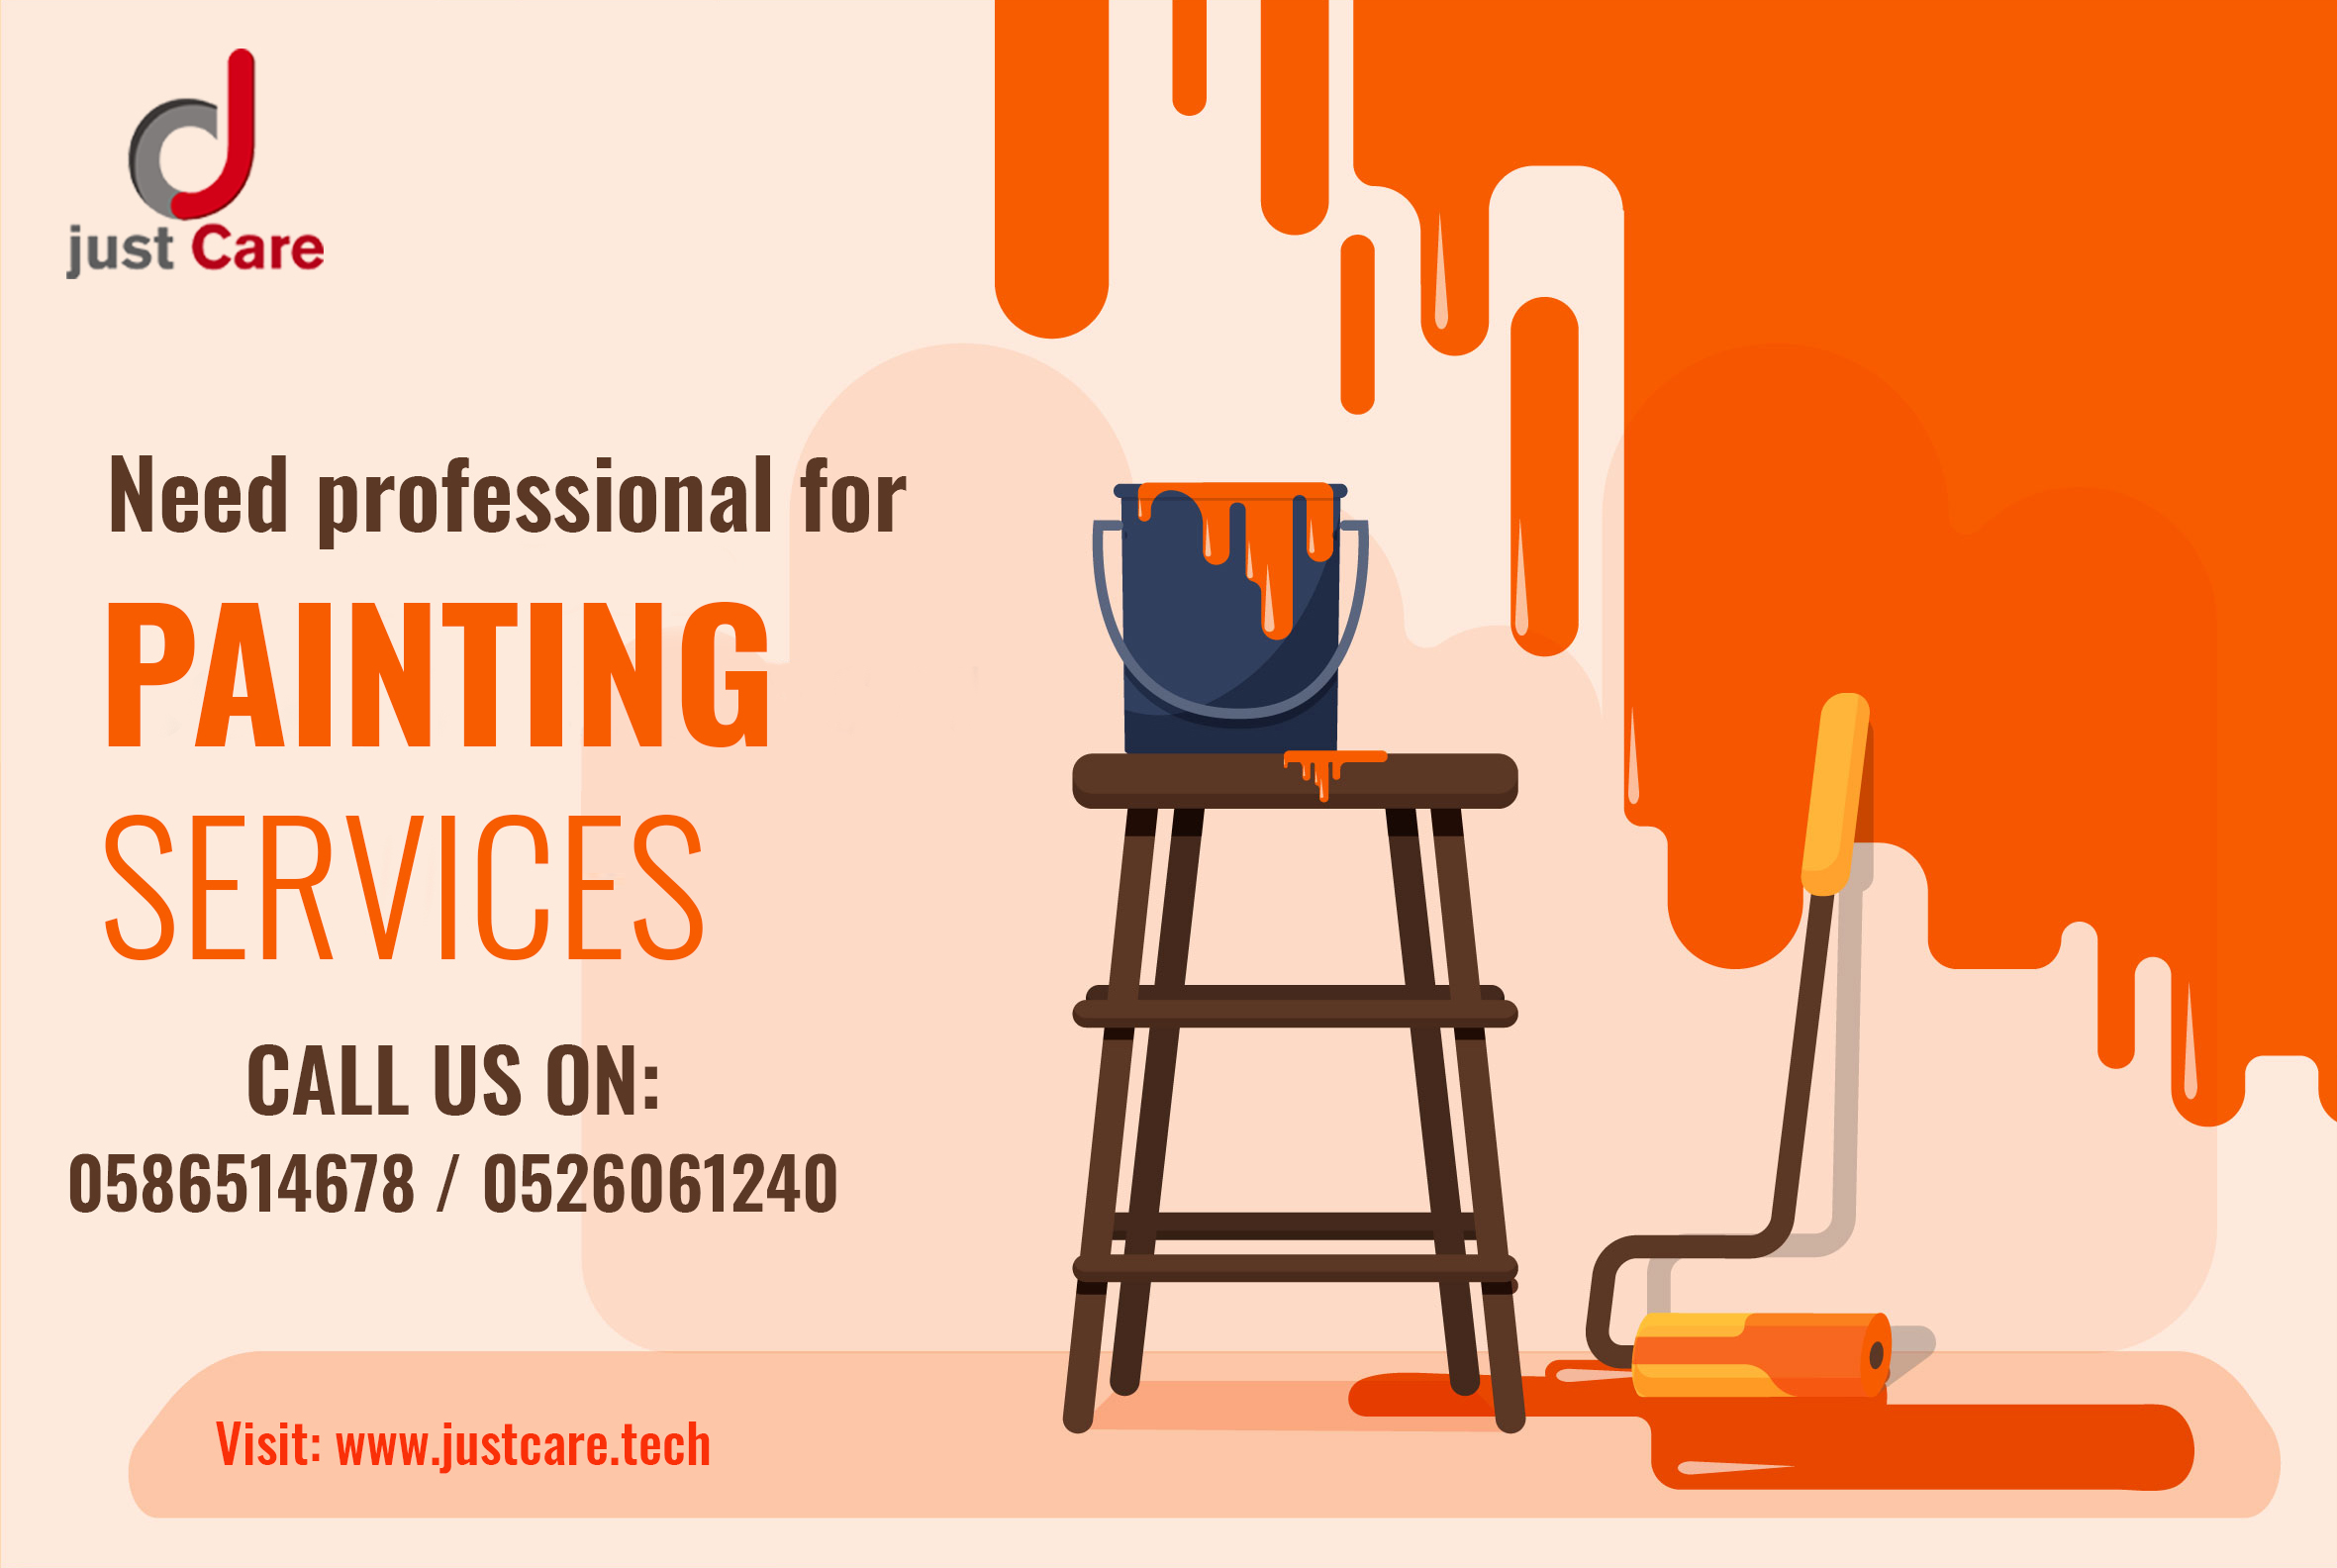 Wall Painting Services in Dubai | Interior Fit Out Companies Dubai